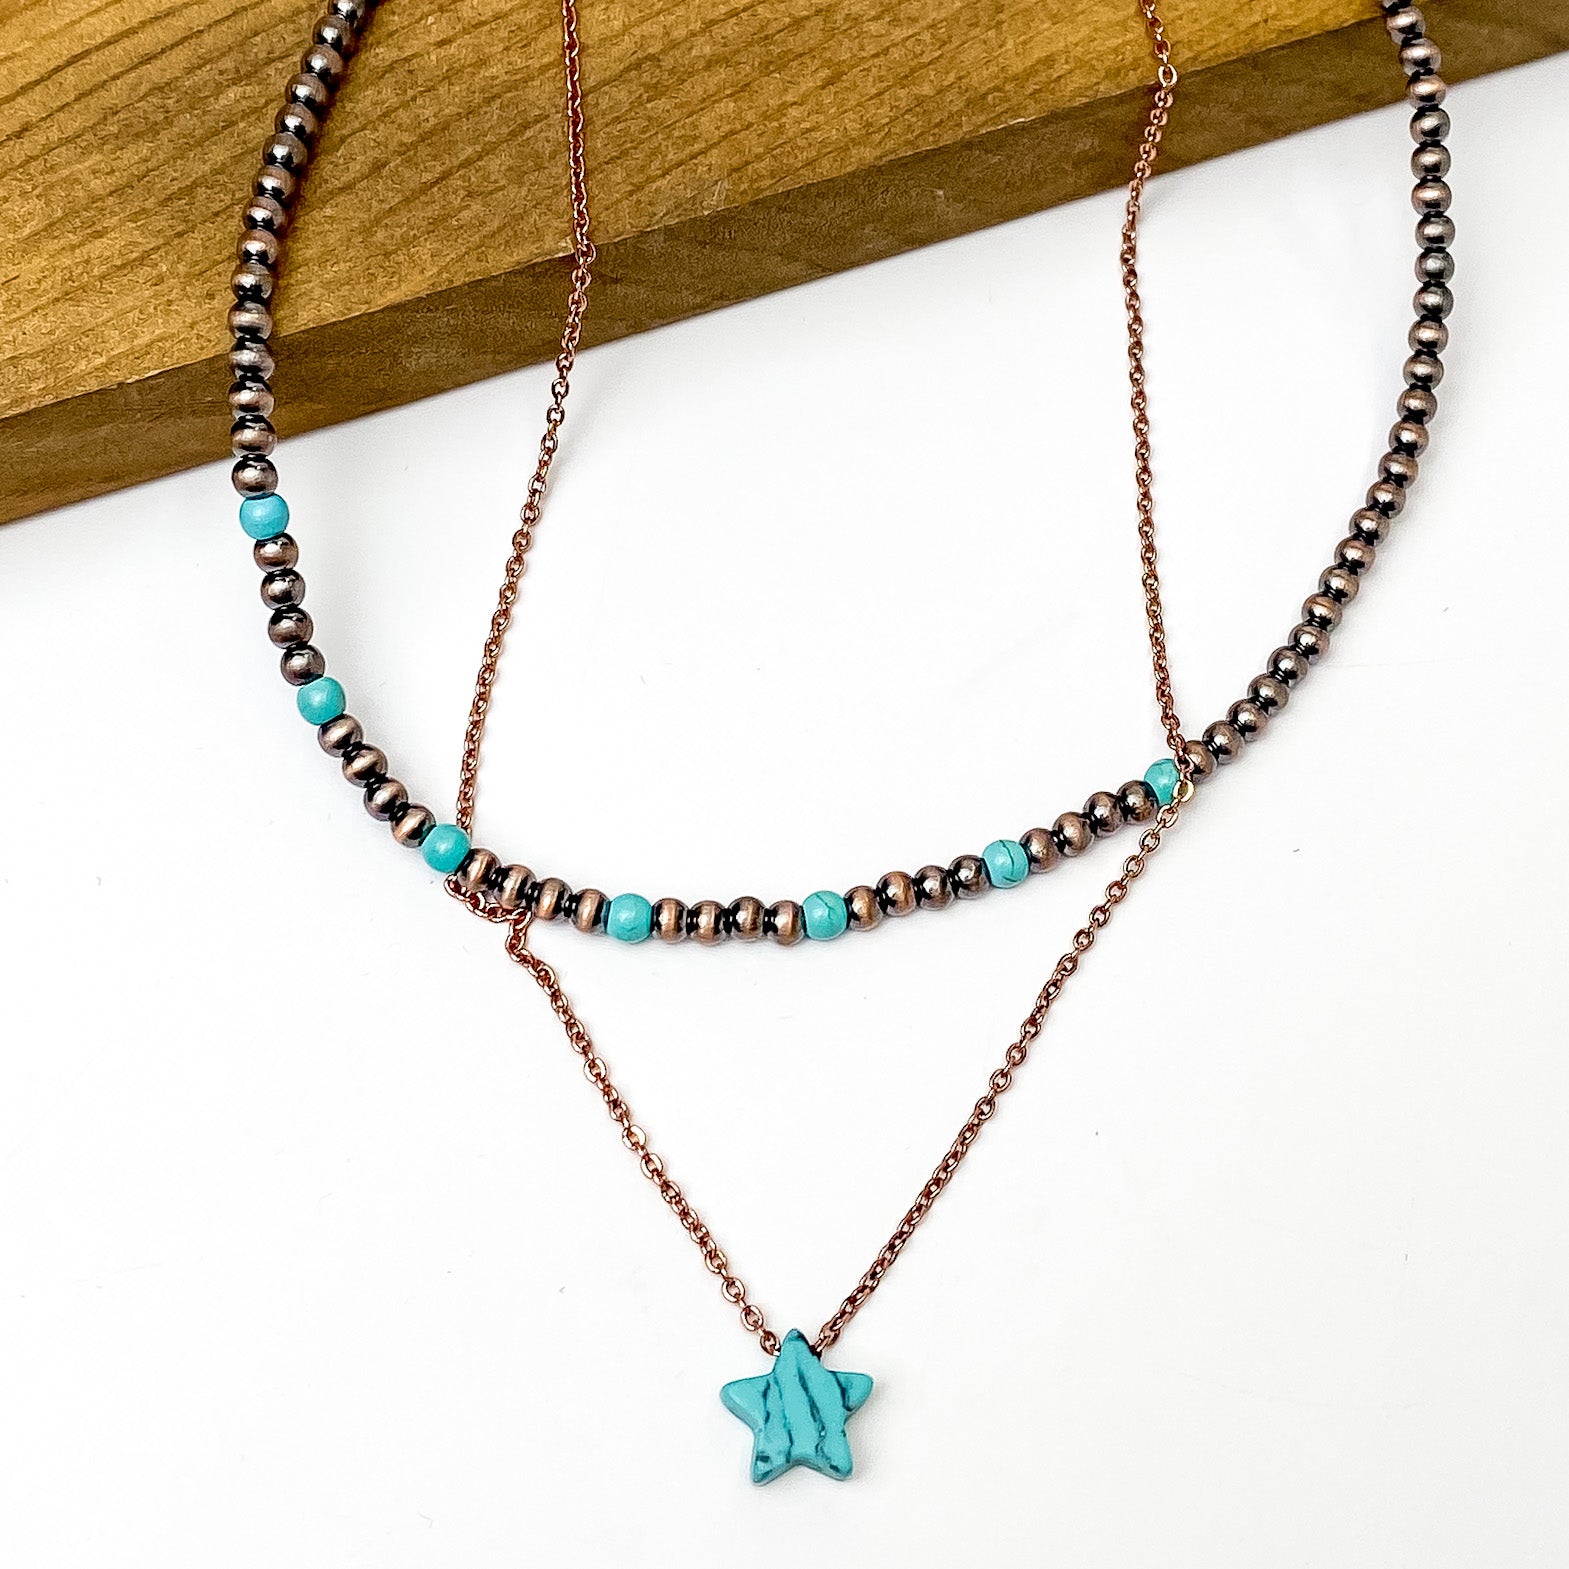 Double Layered Turquoise and Copper Faux Navajo Necklace with Star Charm. Pictured on a white and brown background. 